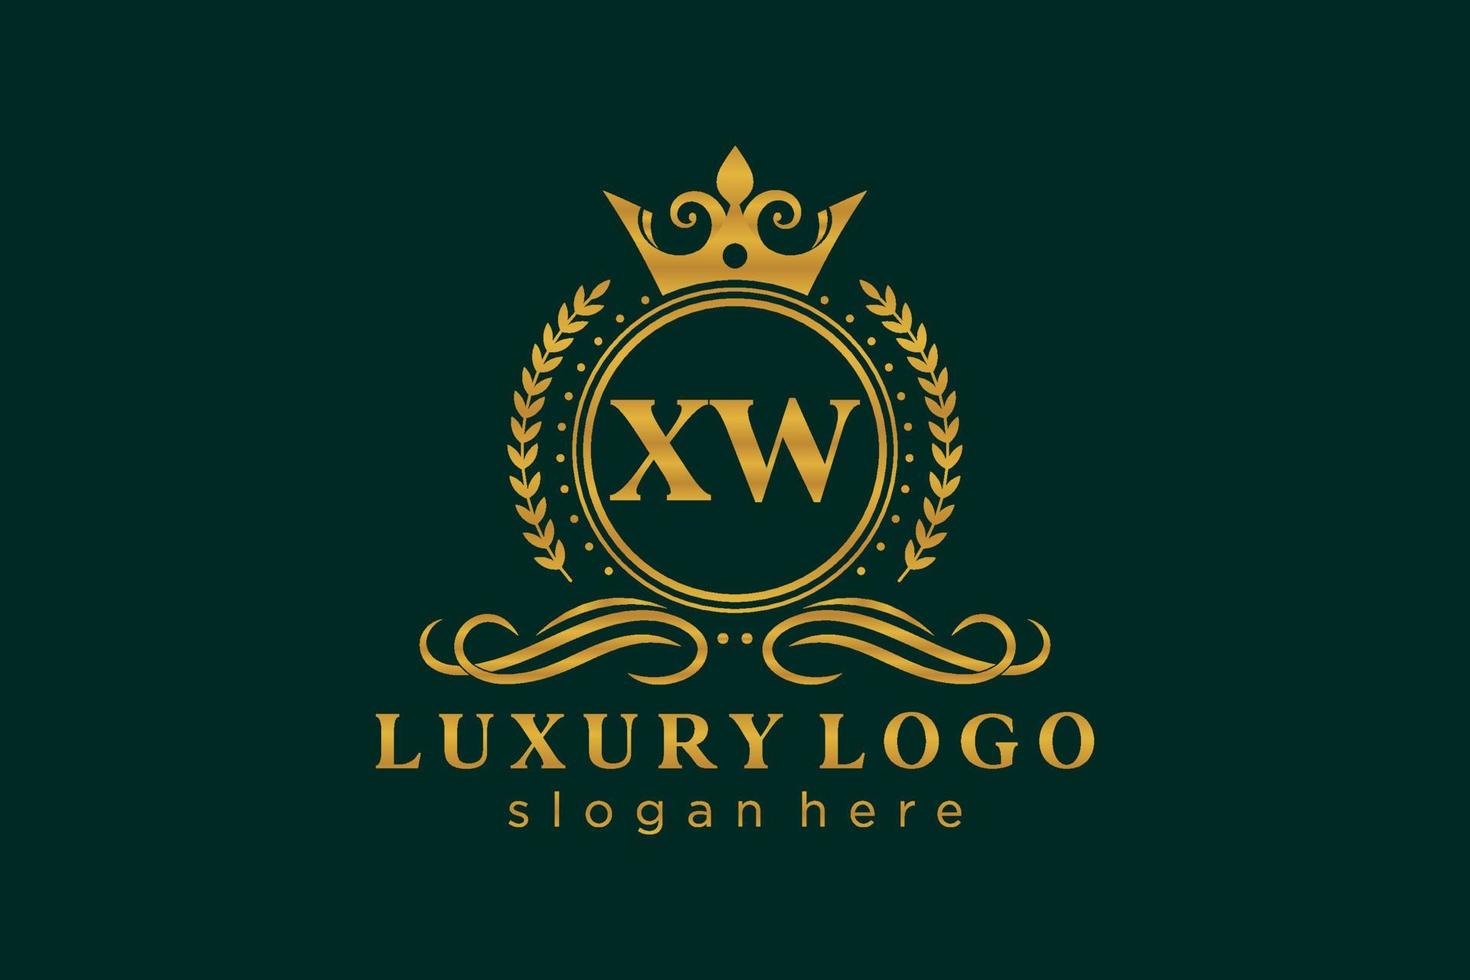 Initial XW Letter Royal Luxury Logo template in vector art for Restaurant, Royalty, Boutique, Cafe, Hotel, Heraldic, Jewelry, Fashion and other vector illustration.